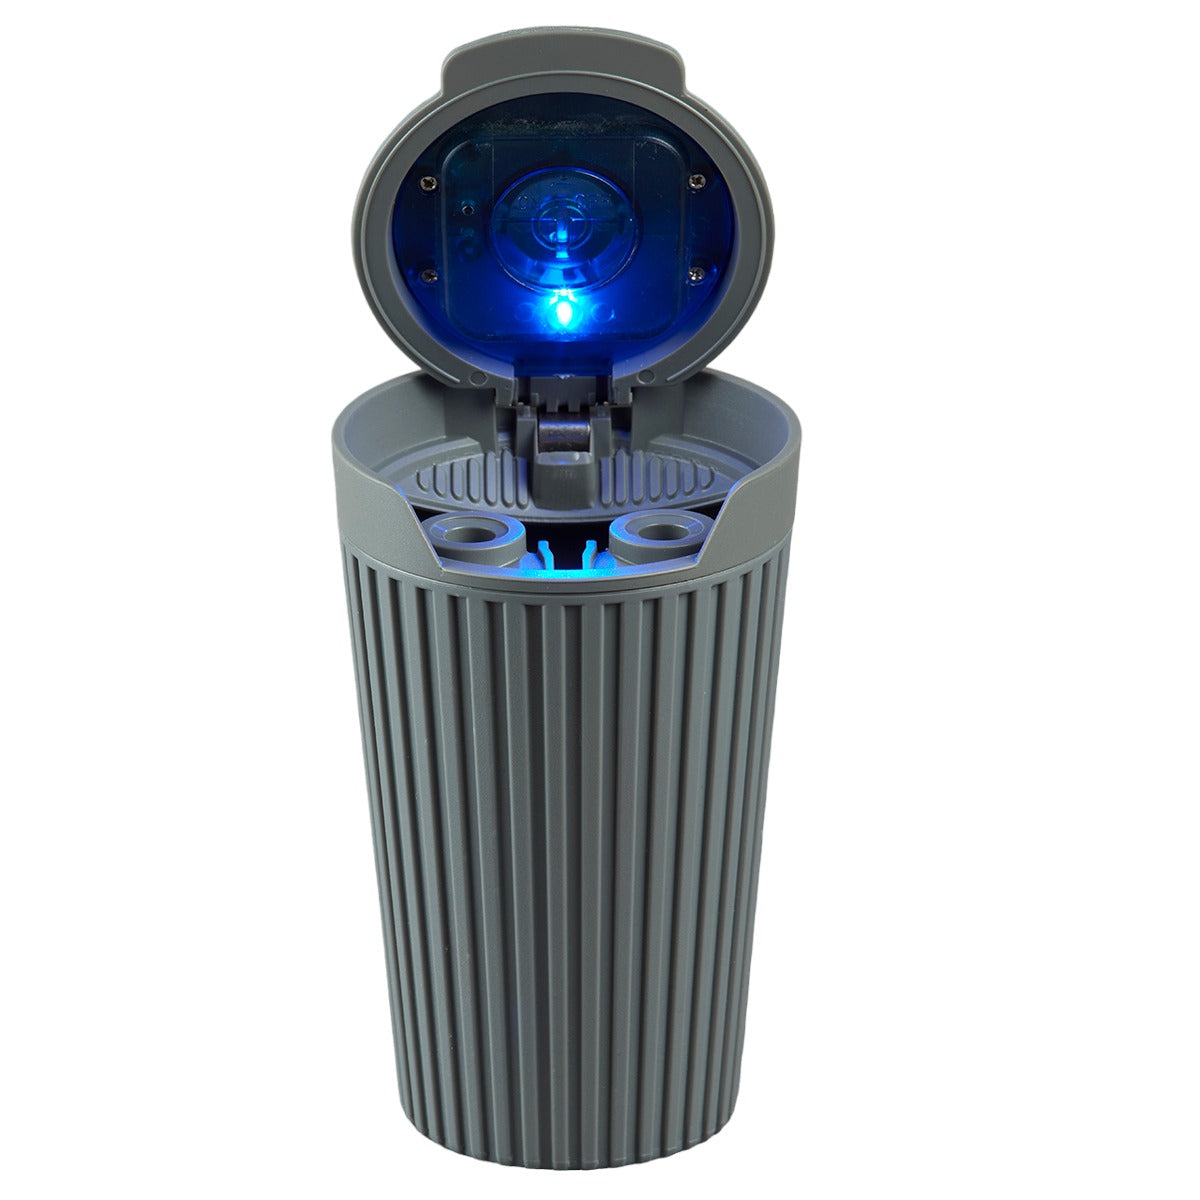 Plastic Car Ashtray Bucket with Lid and LED for Smokers (9796)